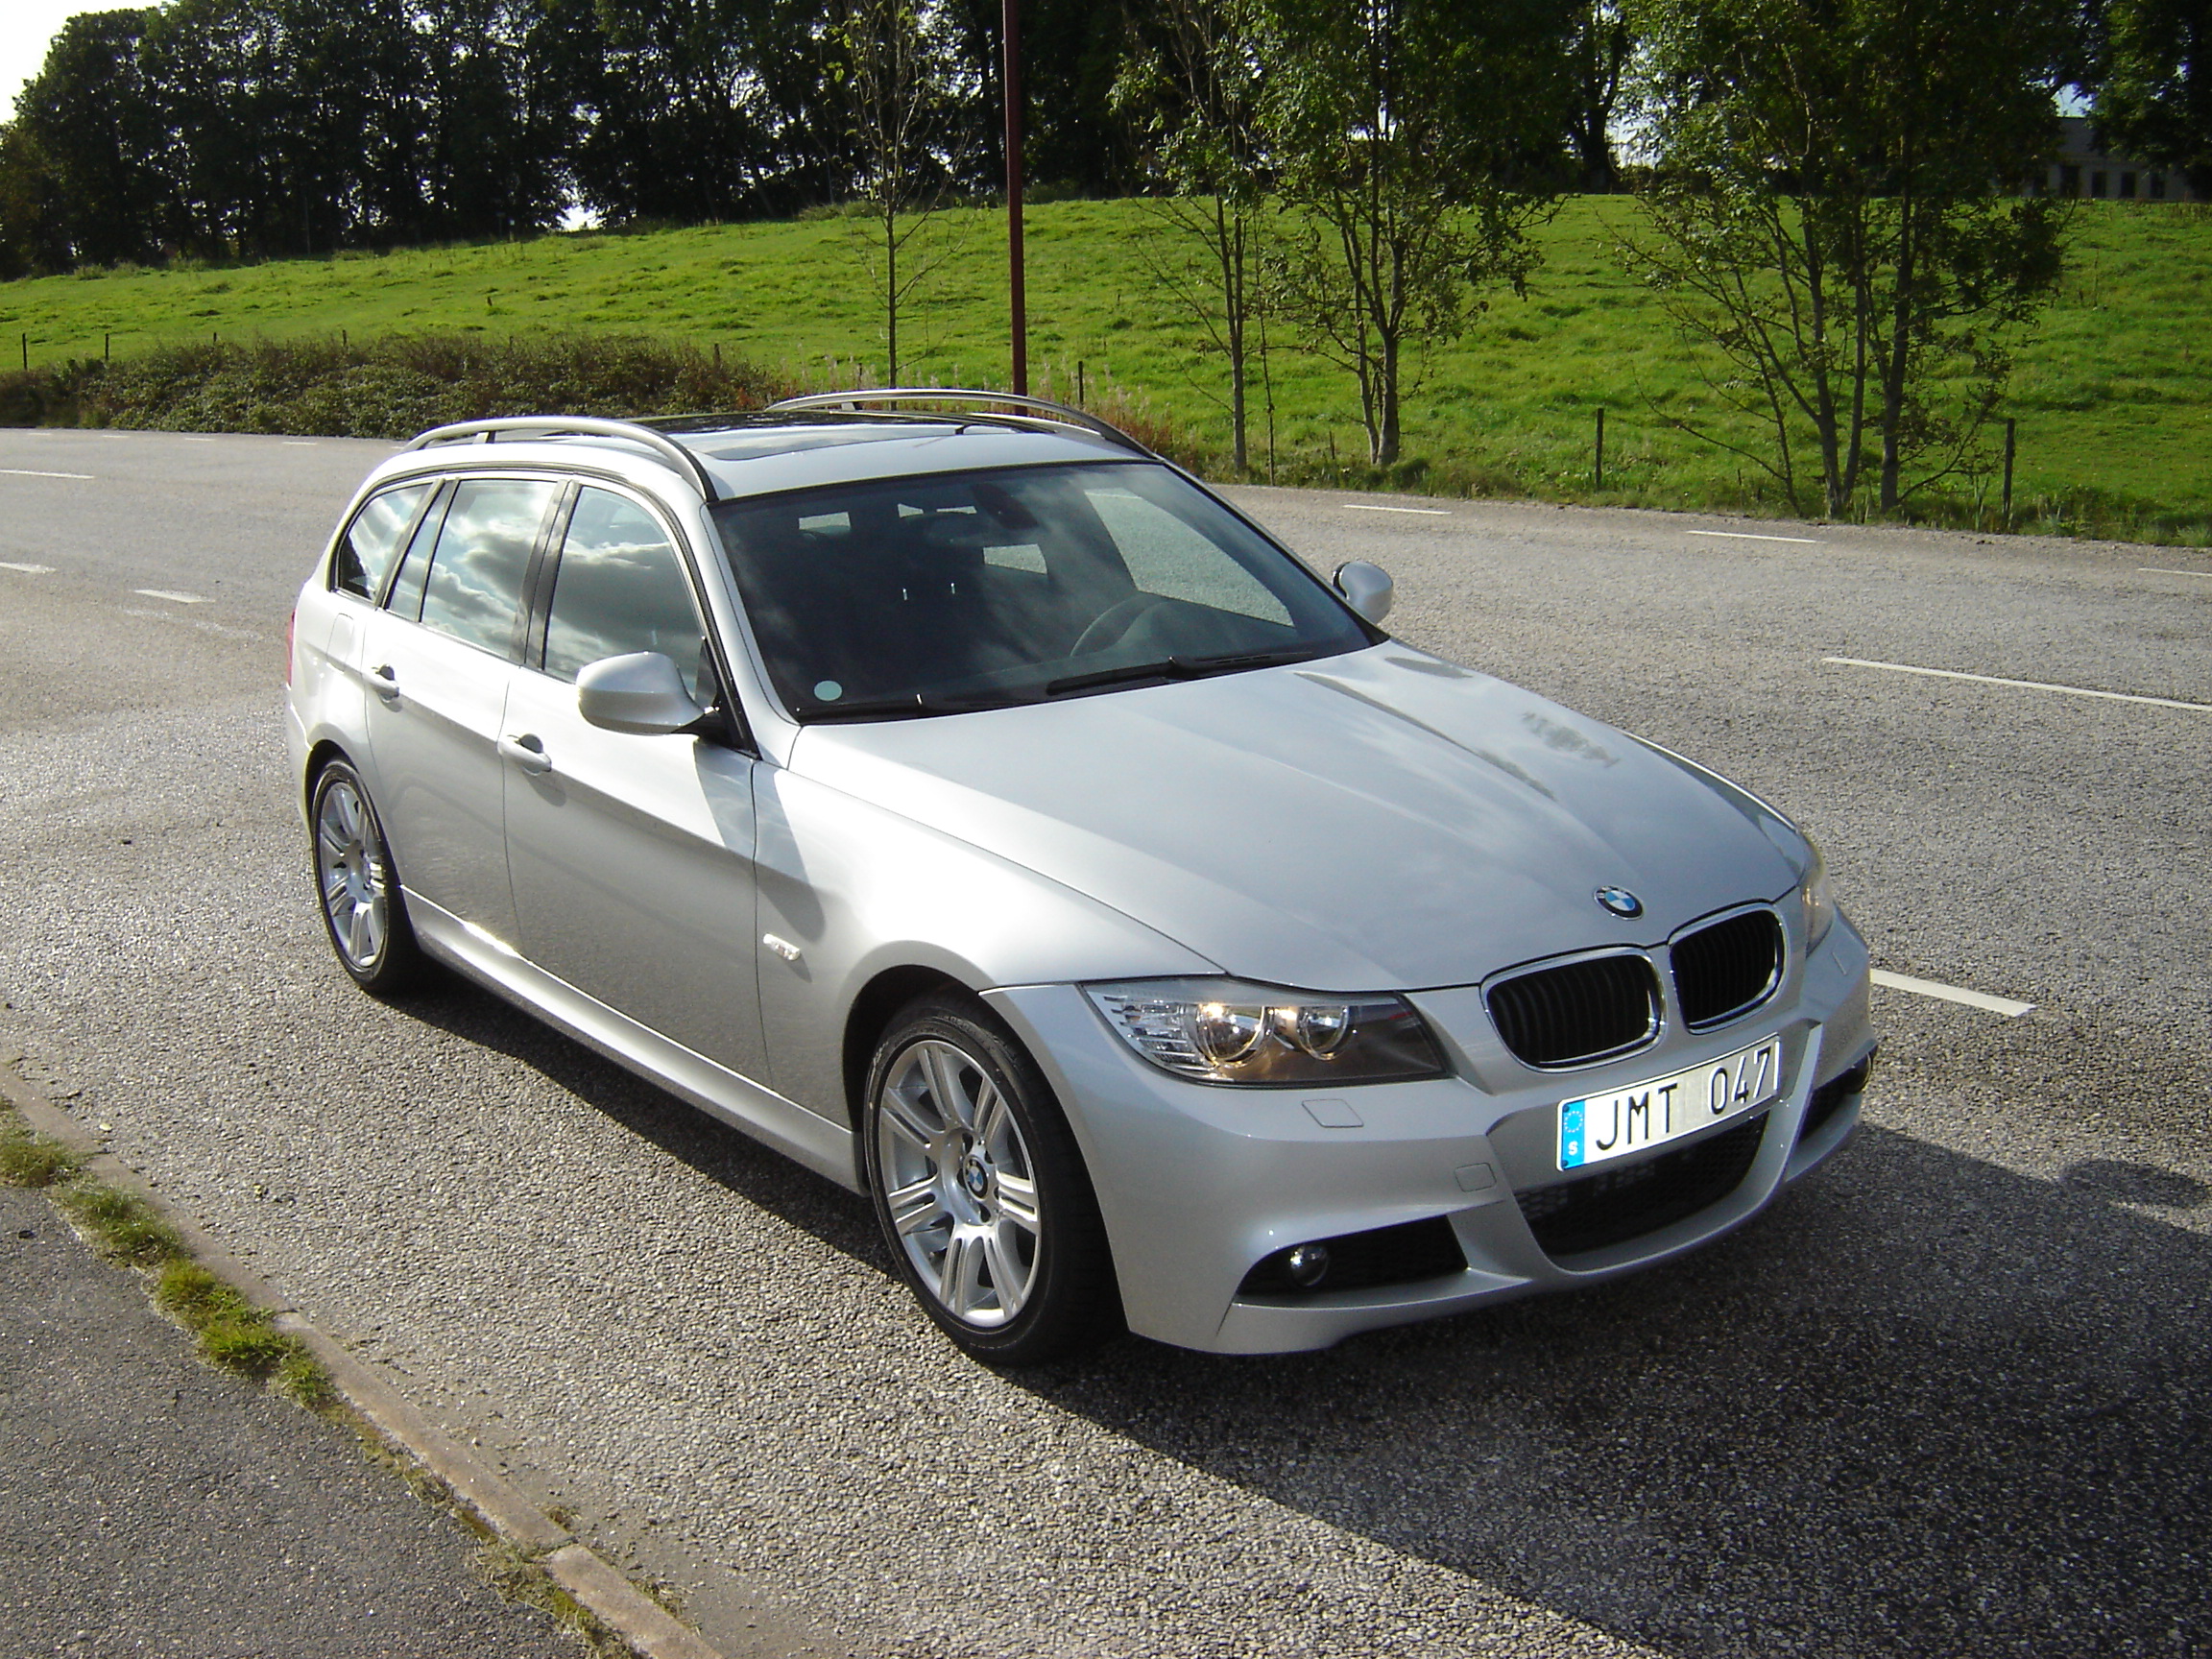 BMW 320d Touring | Flickr - Photo Sharing!